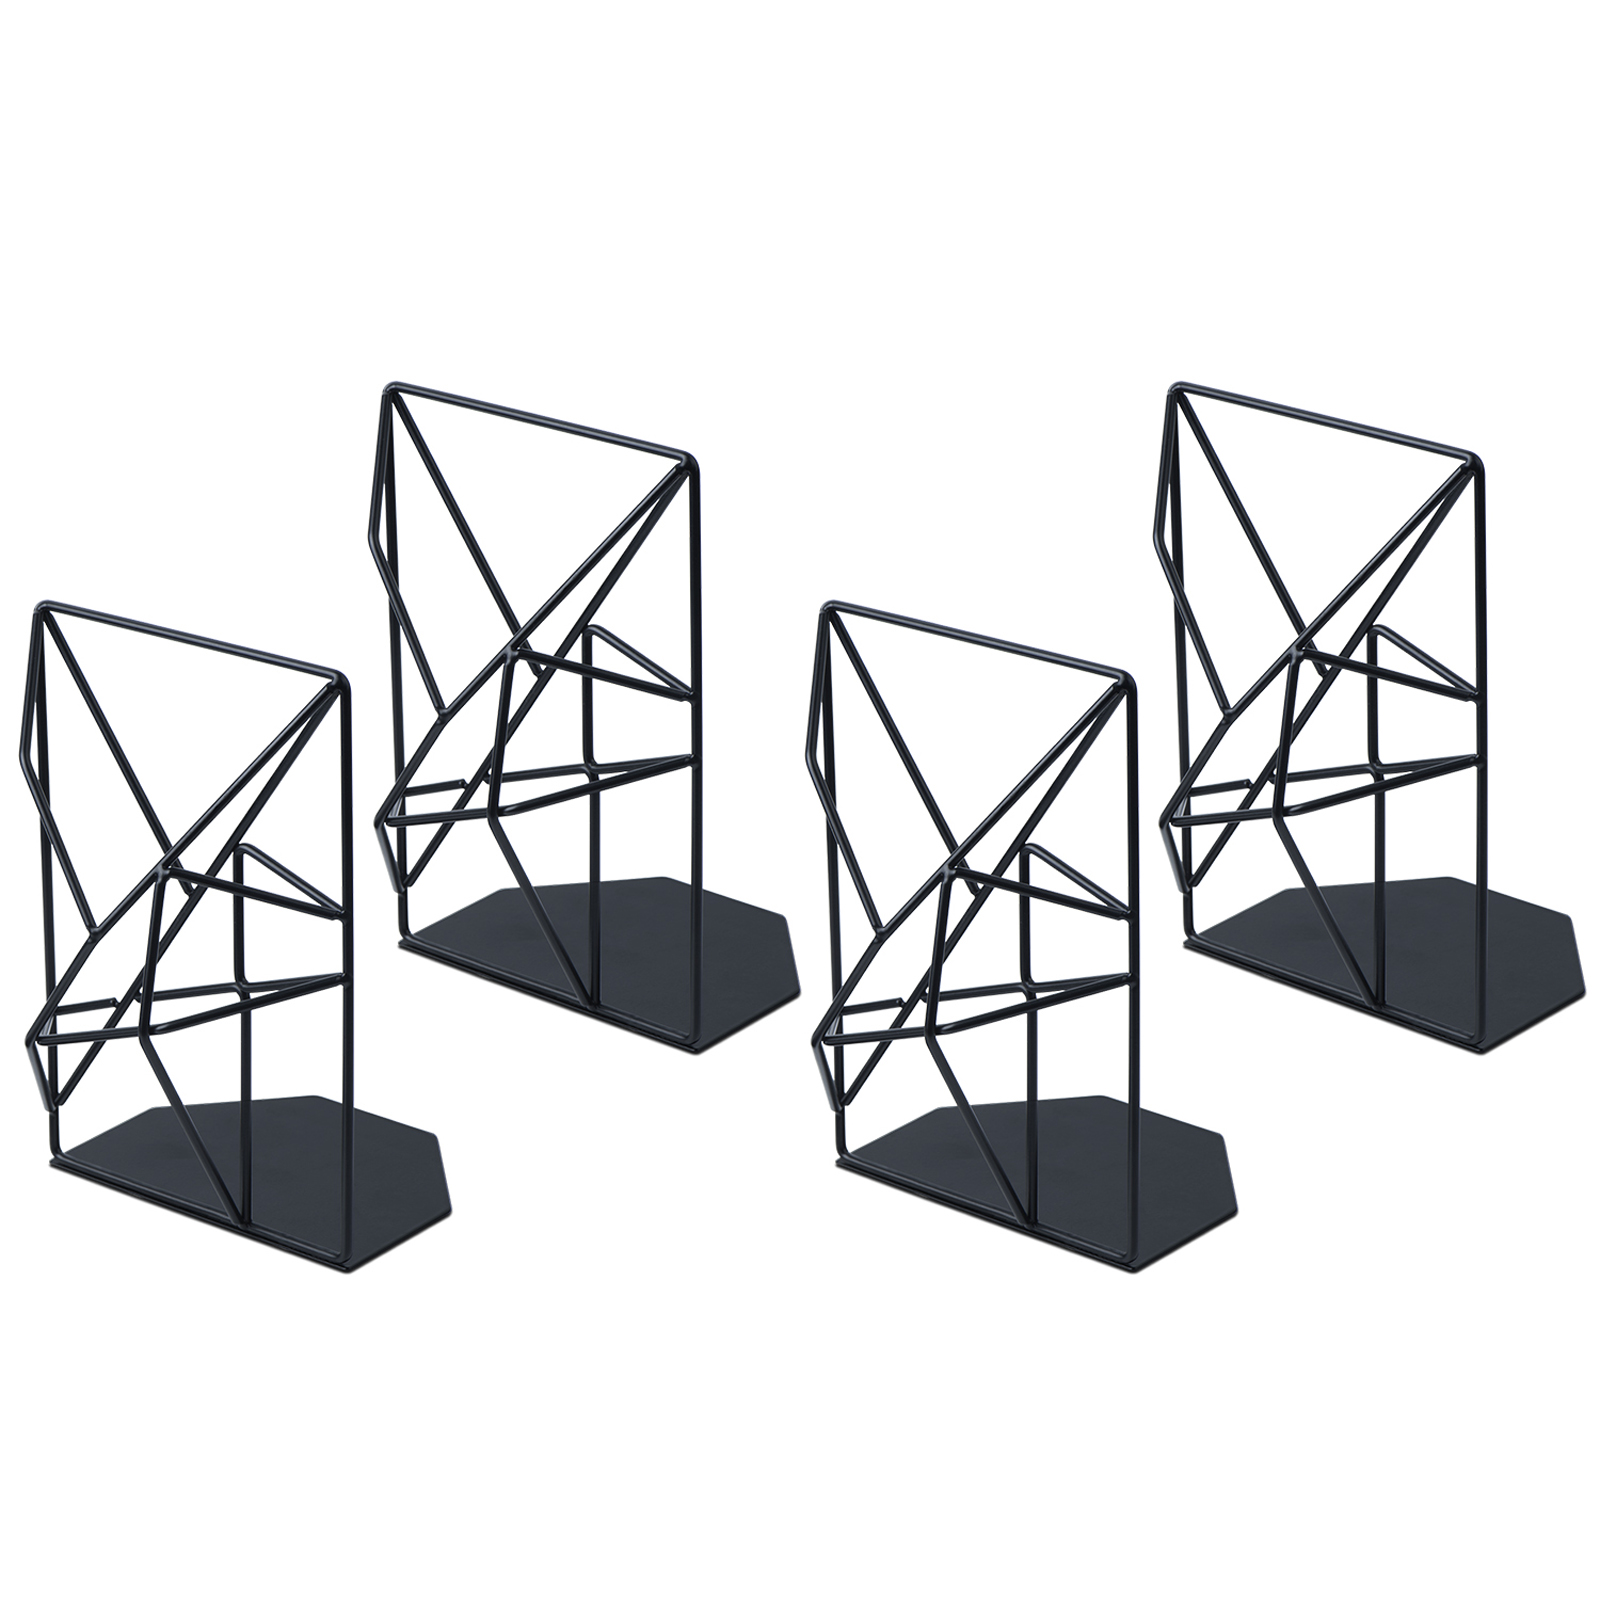 SRIWATANA Book Ends Black, Decorative Metal Bookends for Shelves(2 Pairs/4 Pieces)